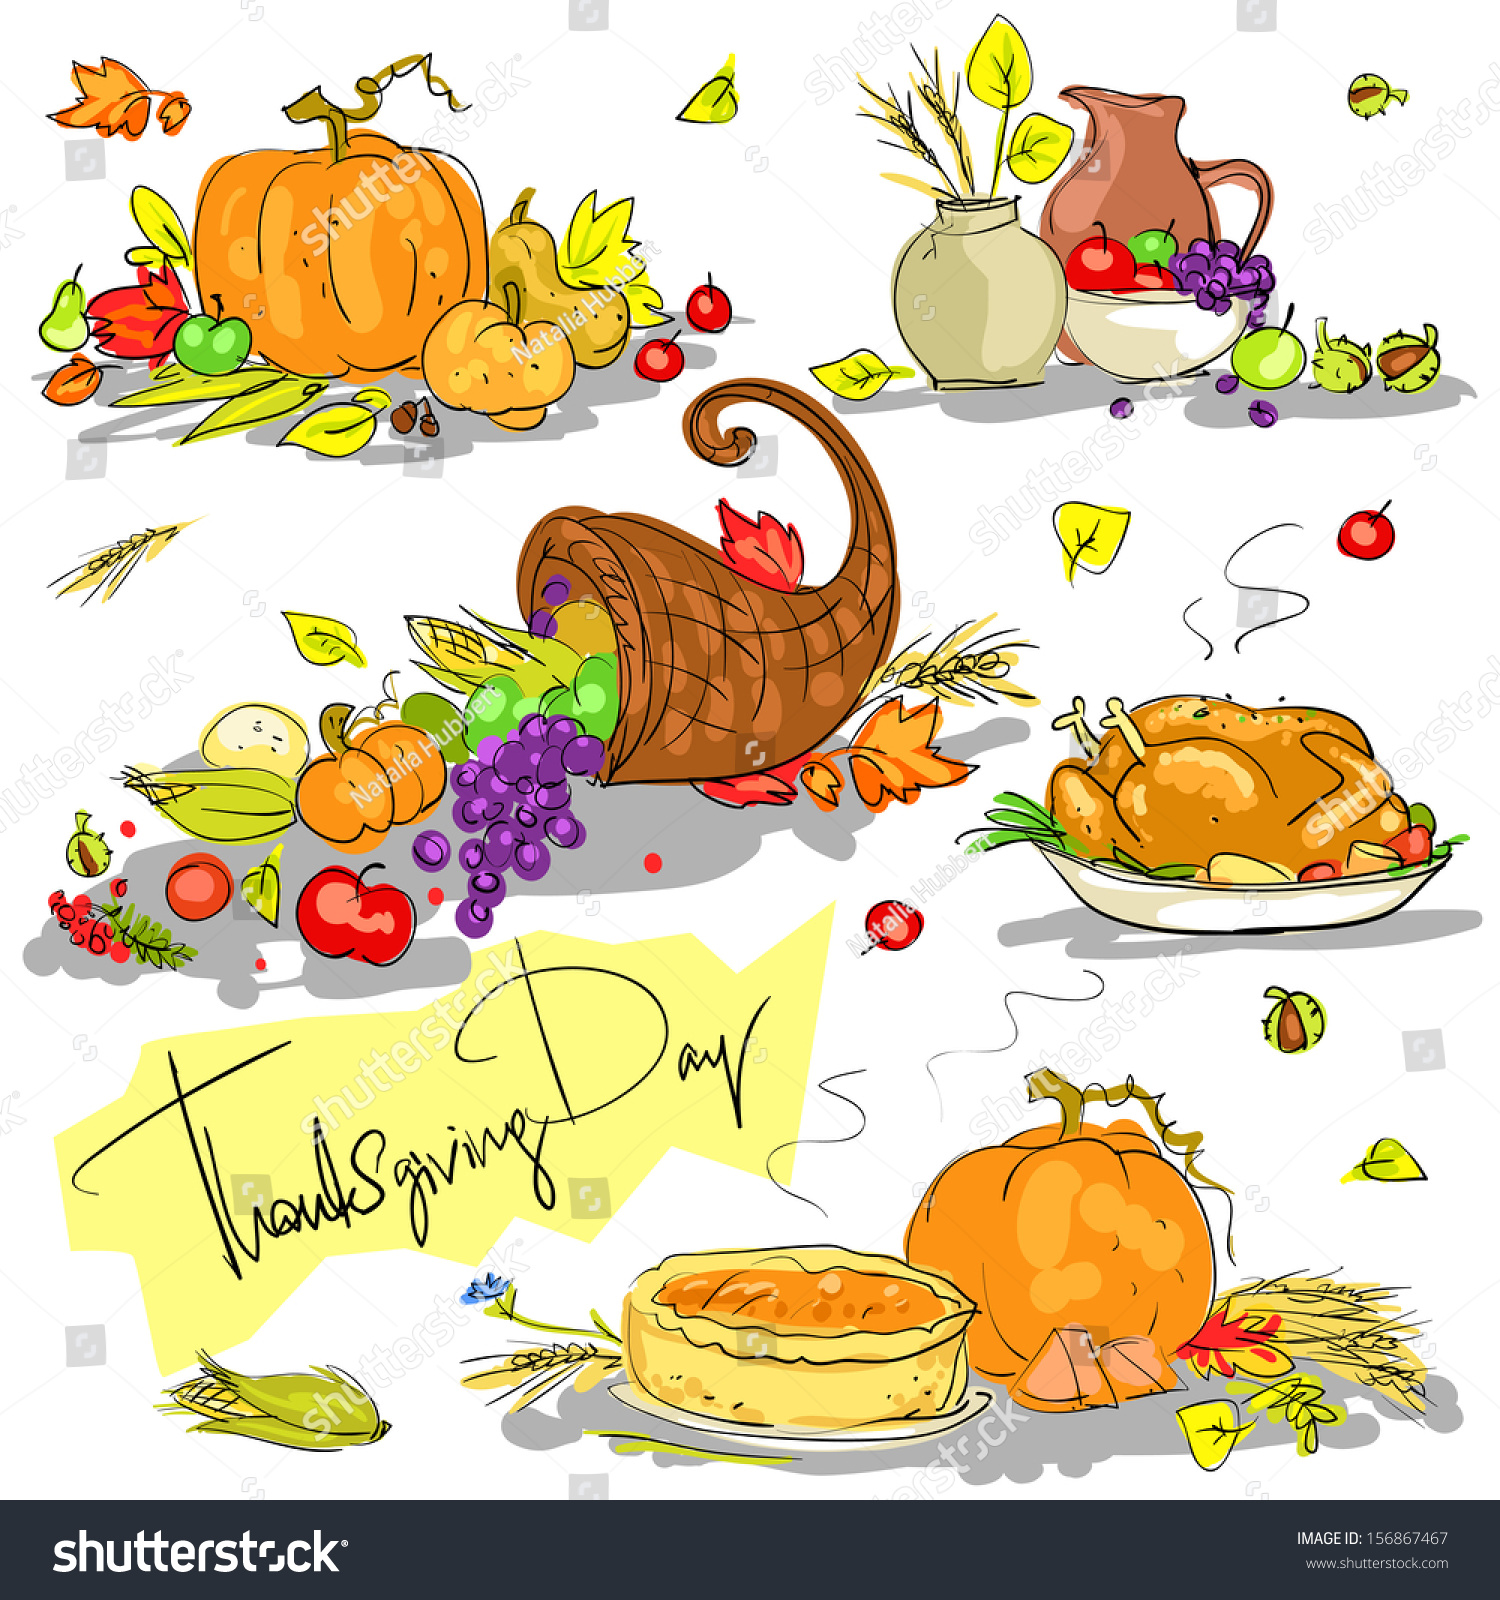 clip art for thanksgiving day - photo #40